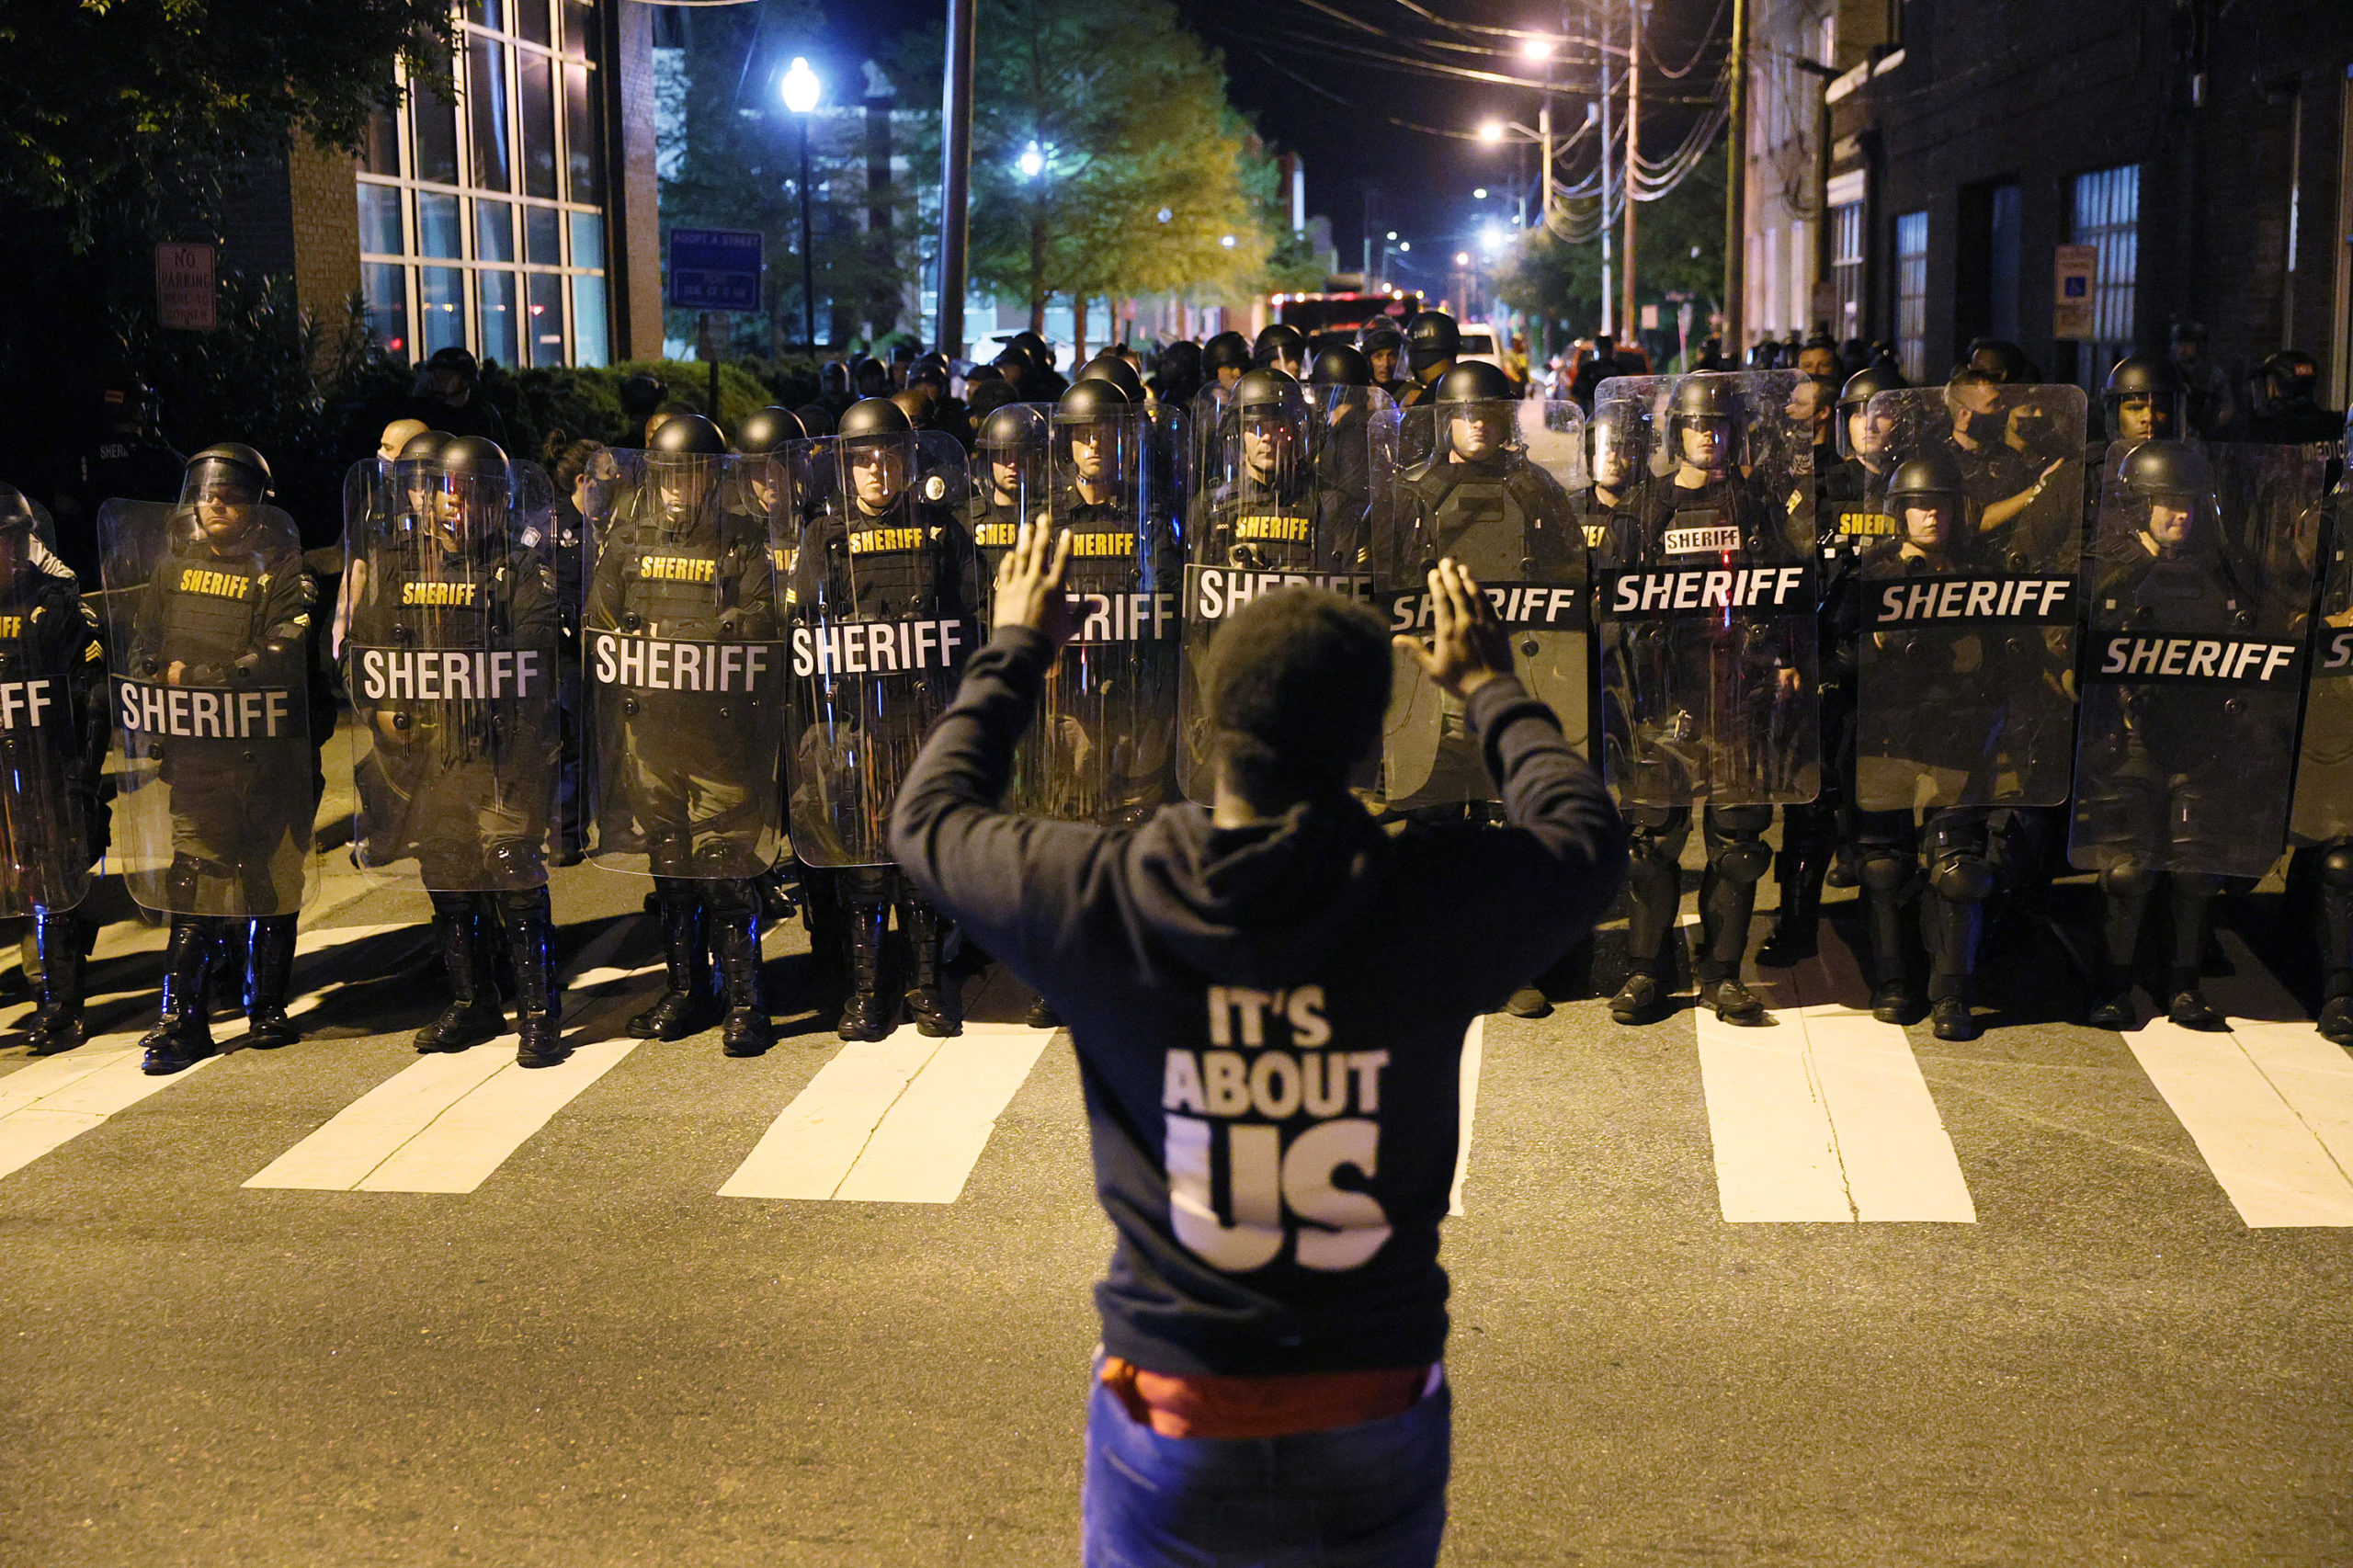 A protester stands with his arms raised as law enforcement officials in riot gear force people off a street on April 28 in Elizabeth City, North Carolina. (Joe Raedle/Getty Images)